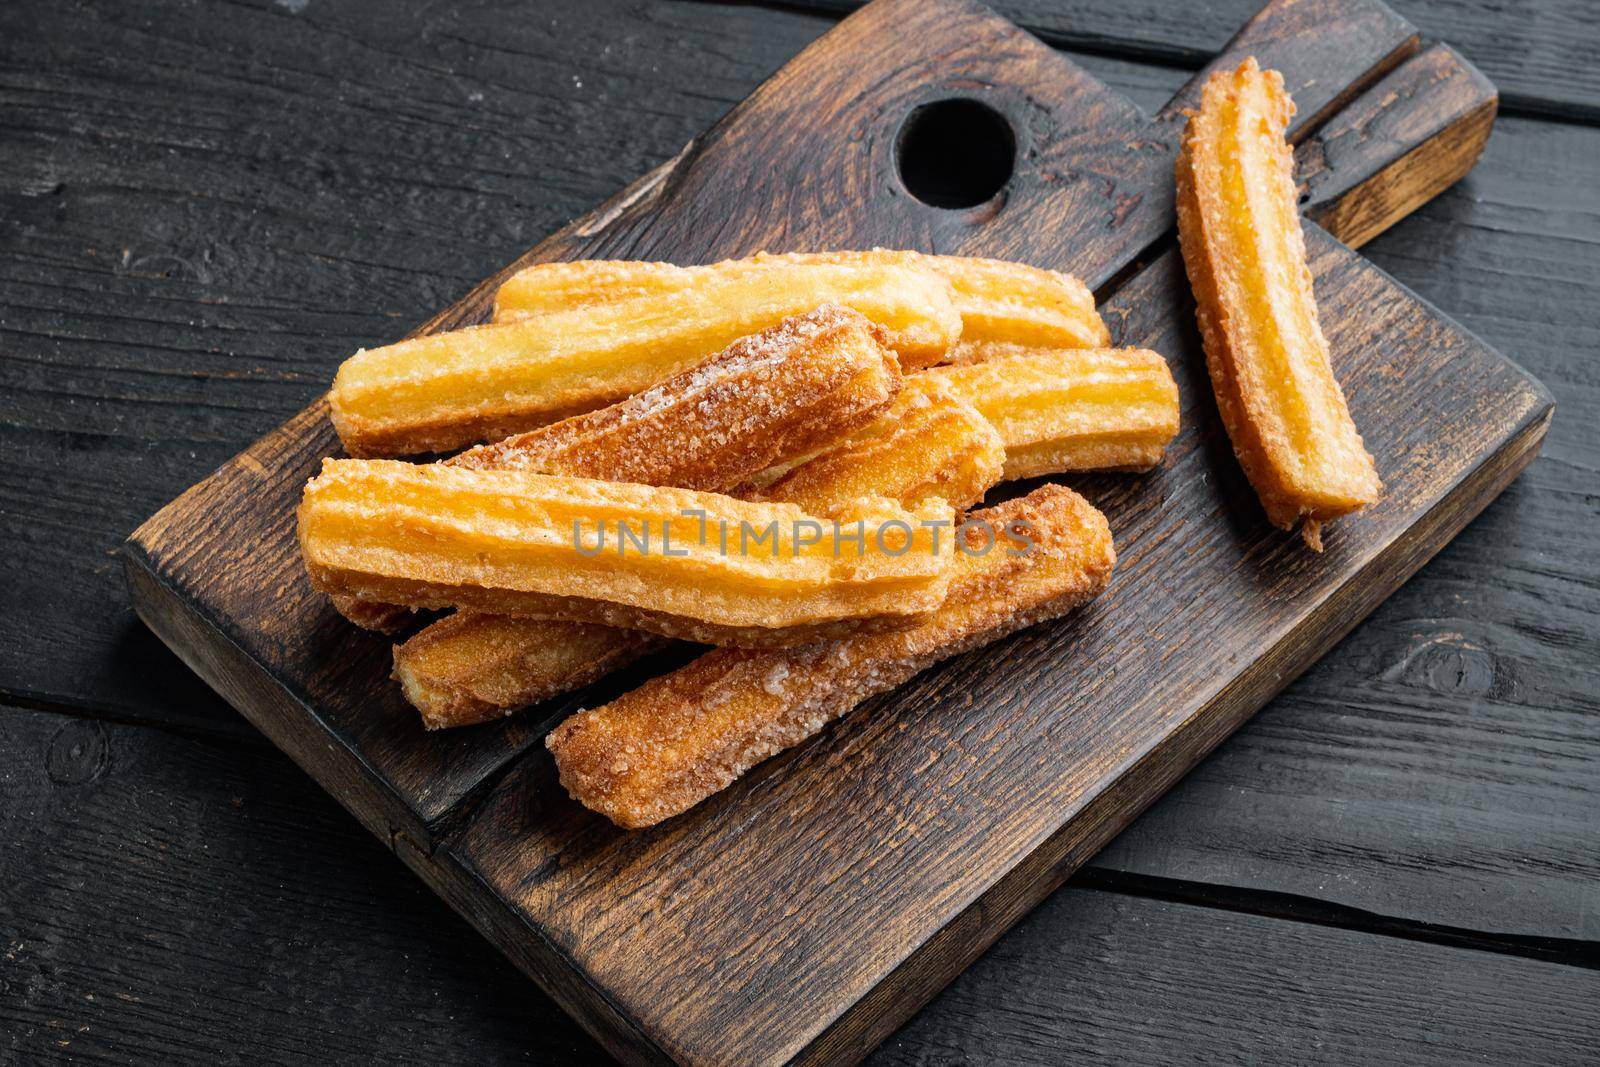 Tasty churros with chocolate caramel sauce, on black wooden table background by Ilianesolenyi